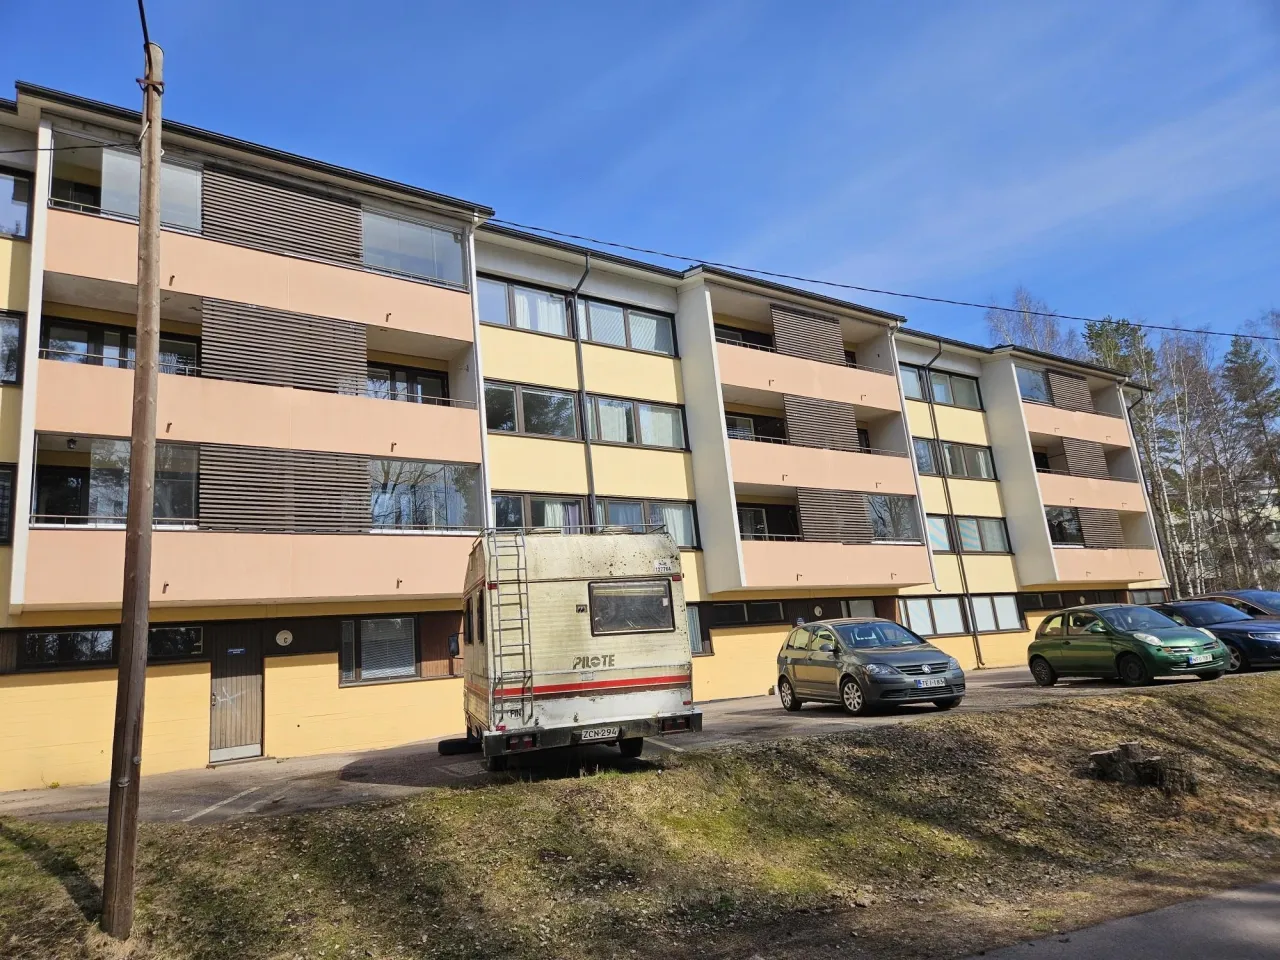 Flat in Kotka, Finland, 70.5 sq.m - picture 1